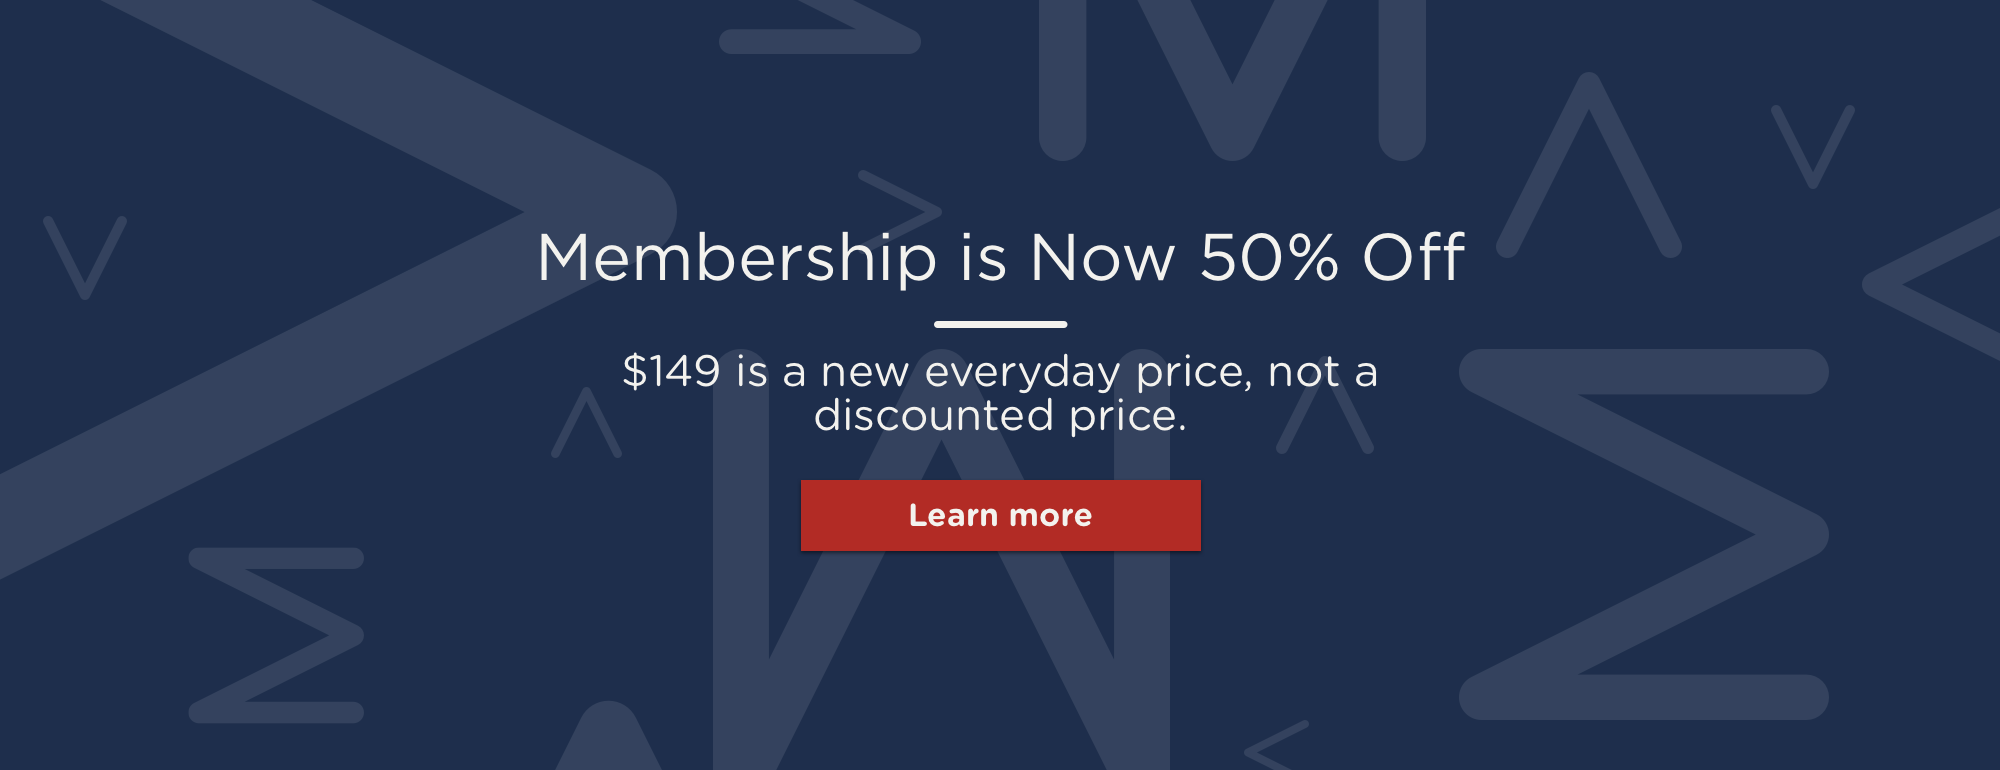 Join membership at 50% off. $149 is a new everyday price, not a discounted price. Learn more